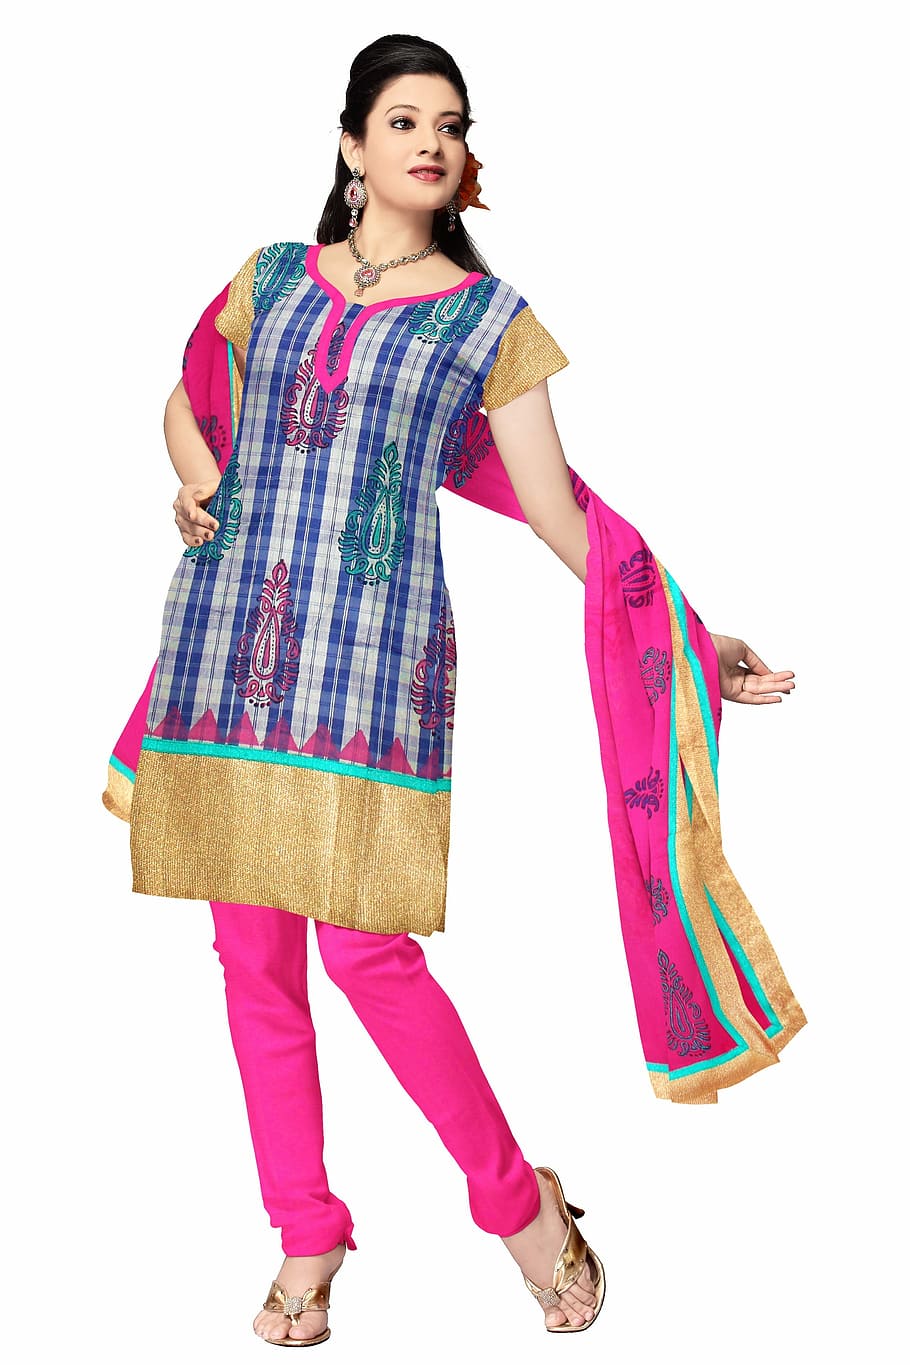 Free download | women, pink, blue, green, short-sleeved, traditional ...